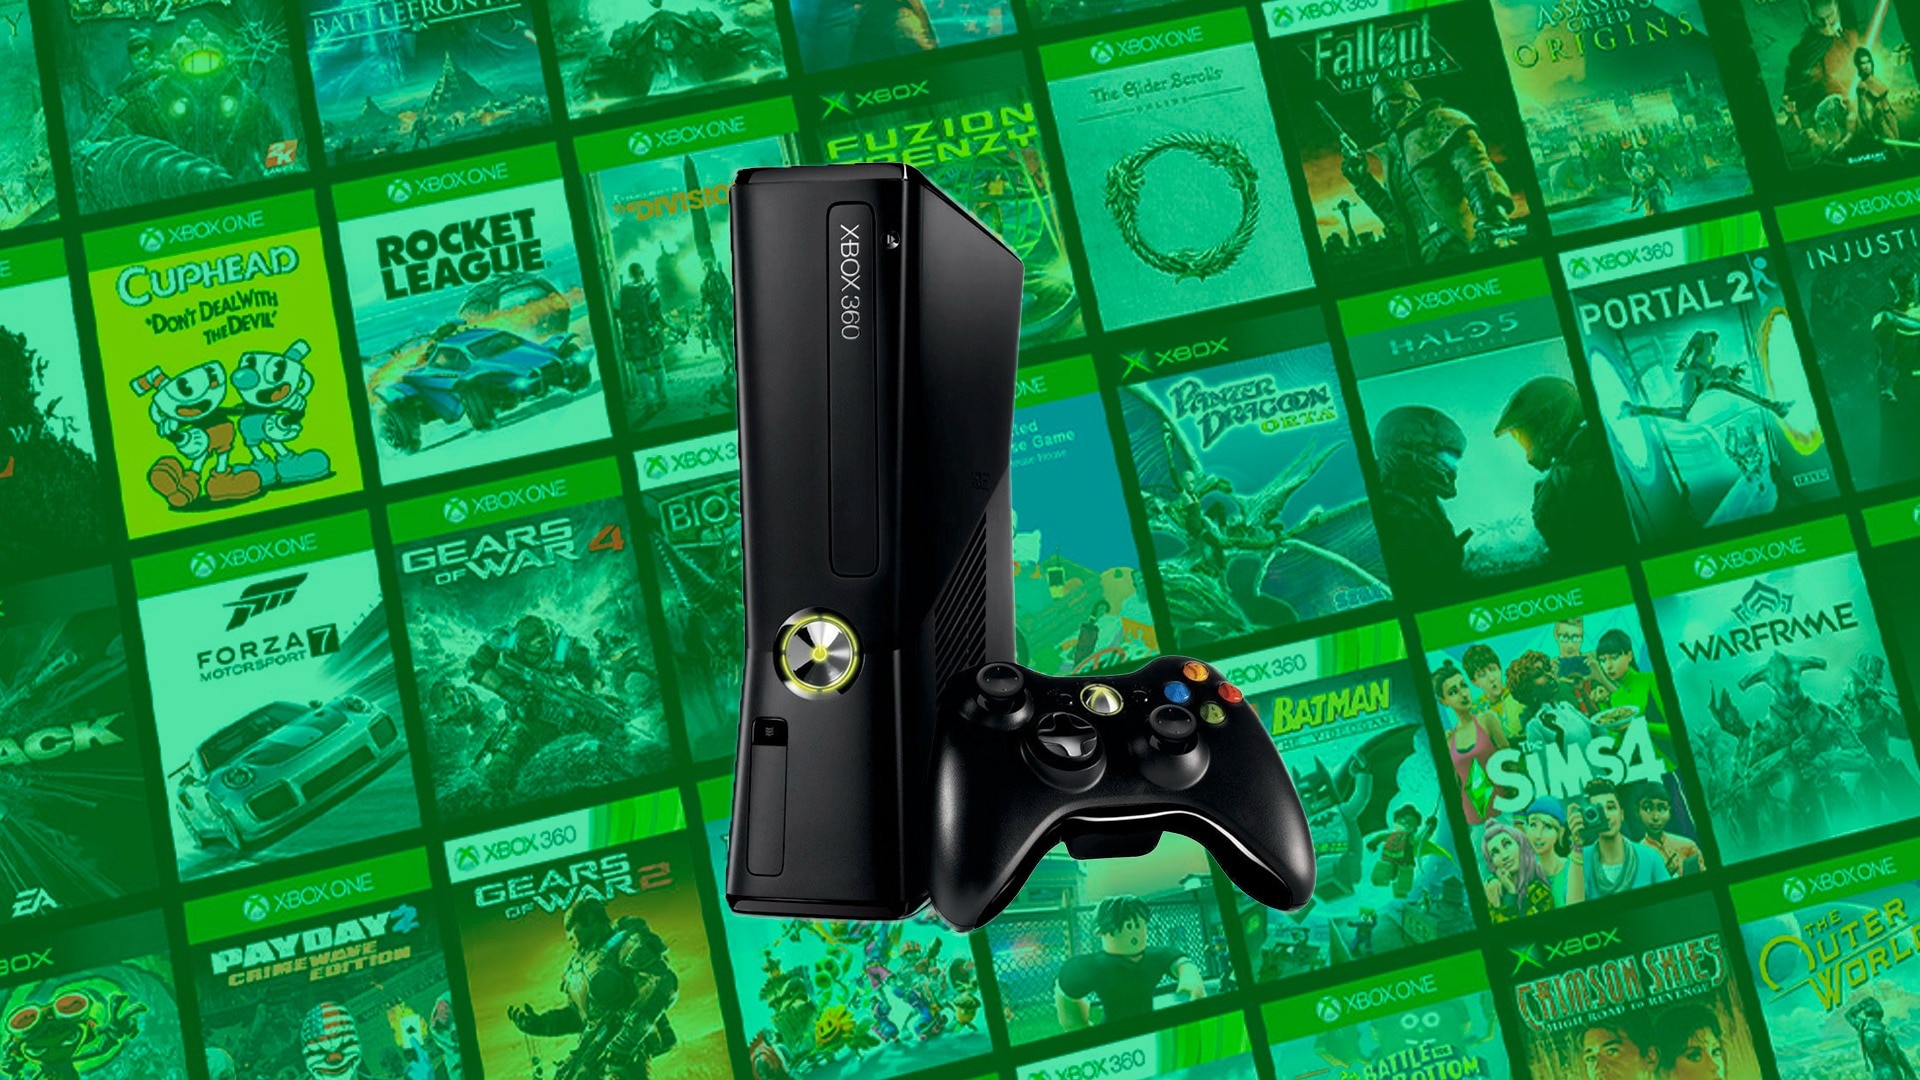 Xbox 360 games are getting Xbox One boxes